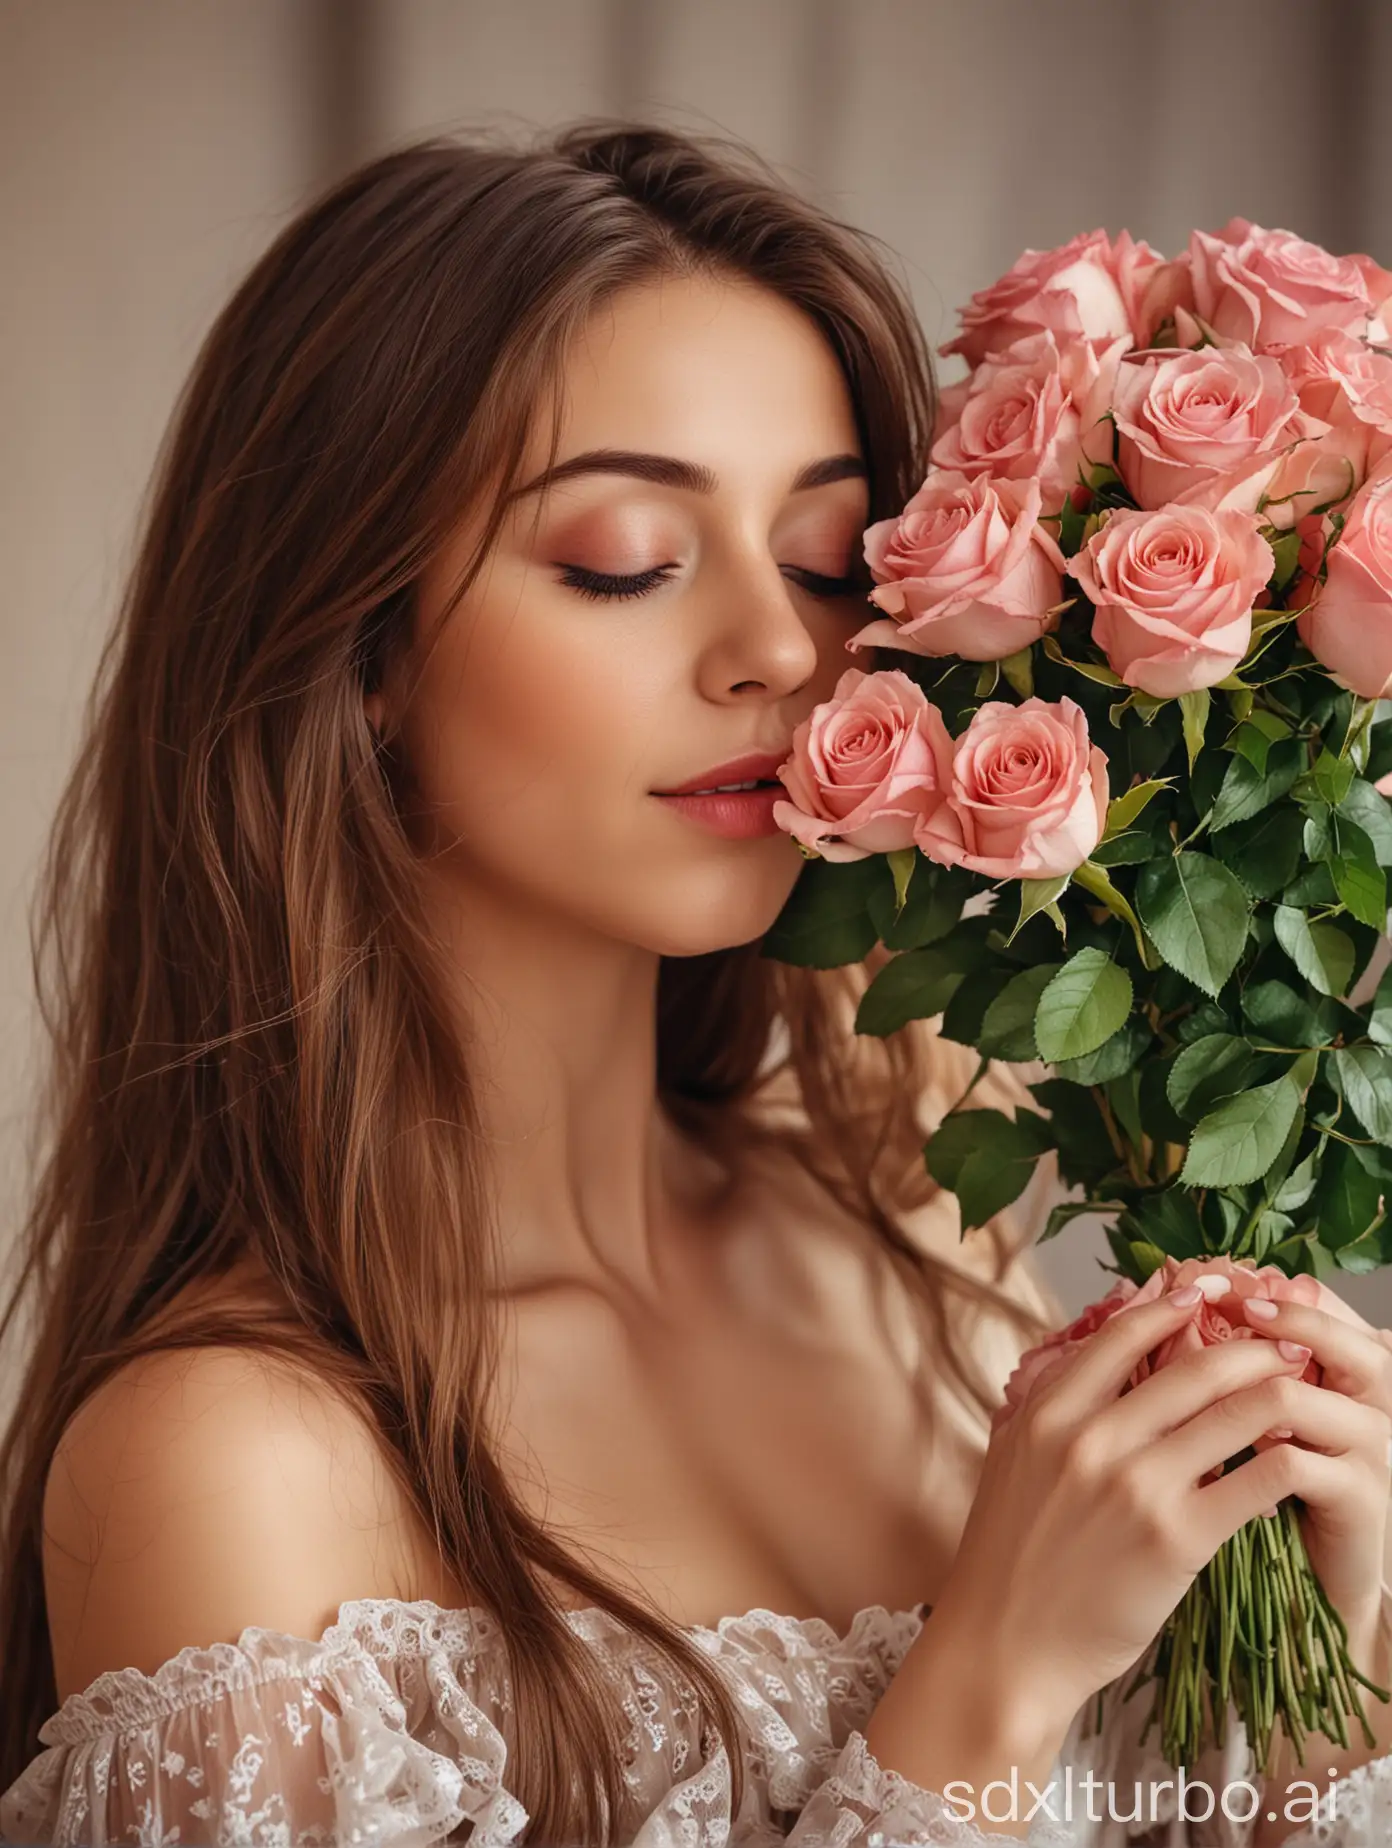 Woman-with-Long-Brown-Hair-Smelling-Bouquet-of-Realistic-Roses